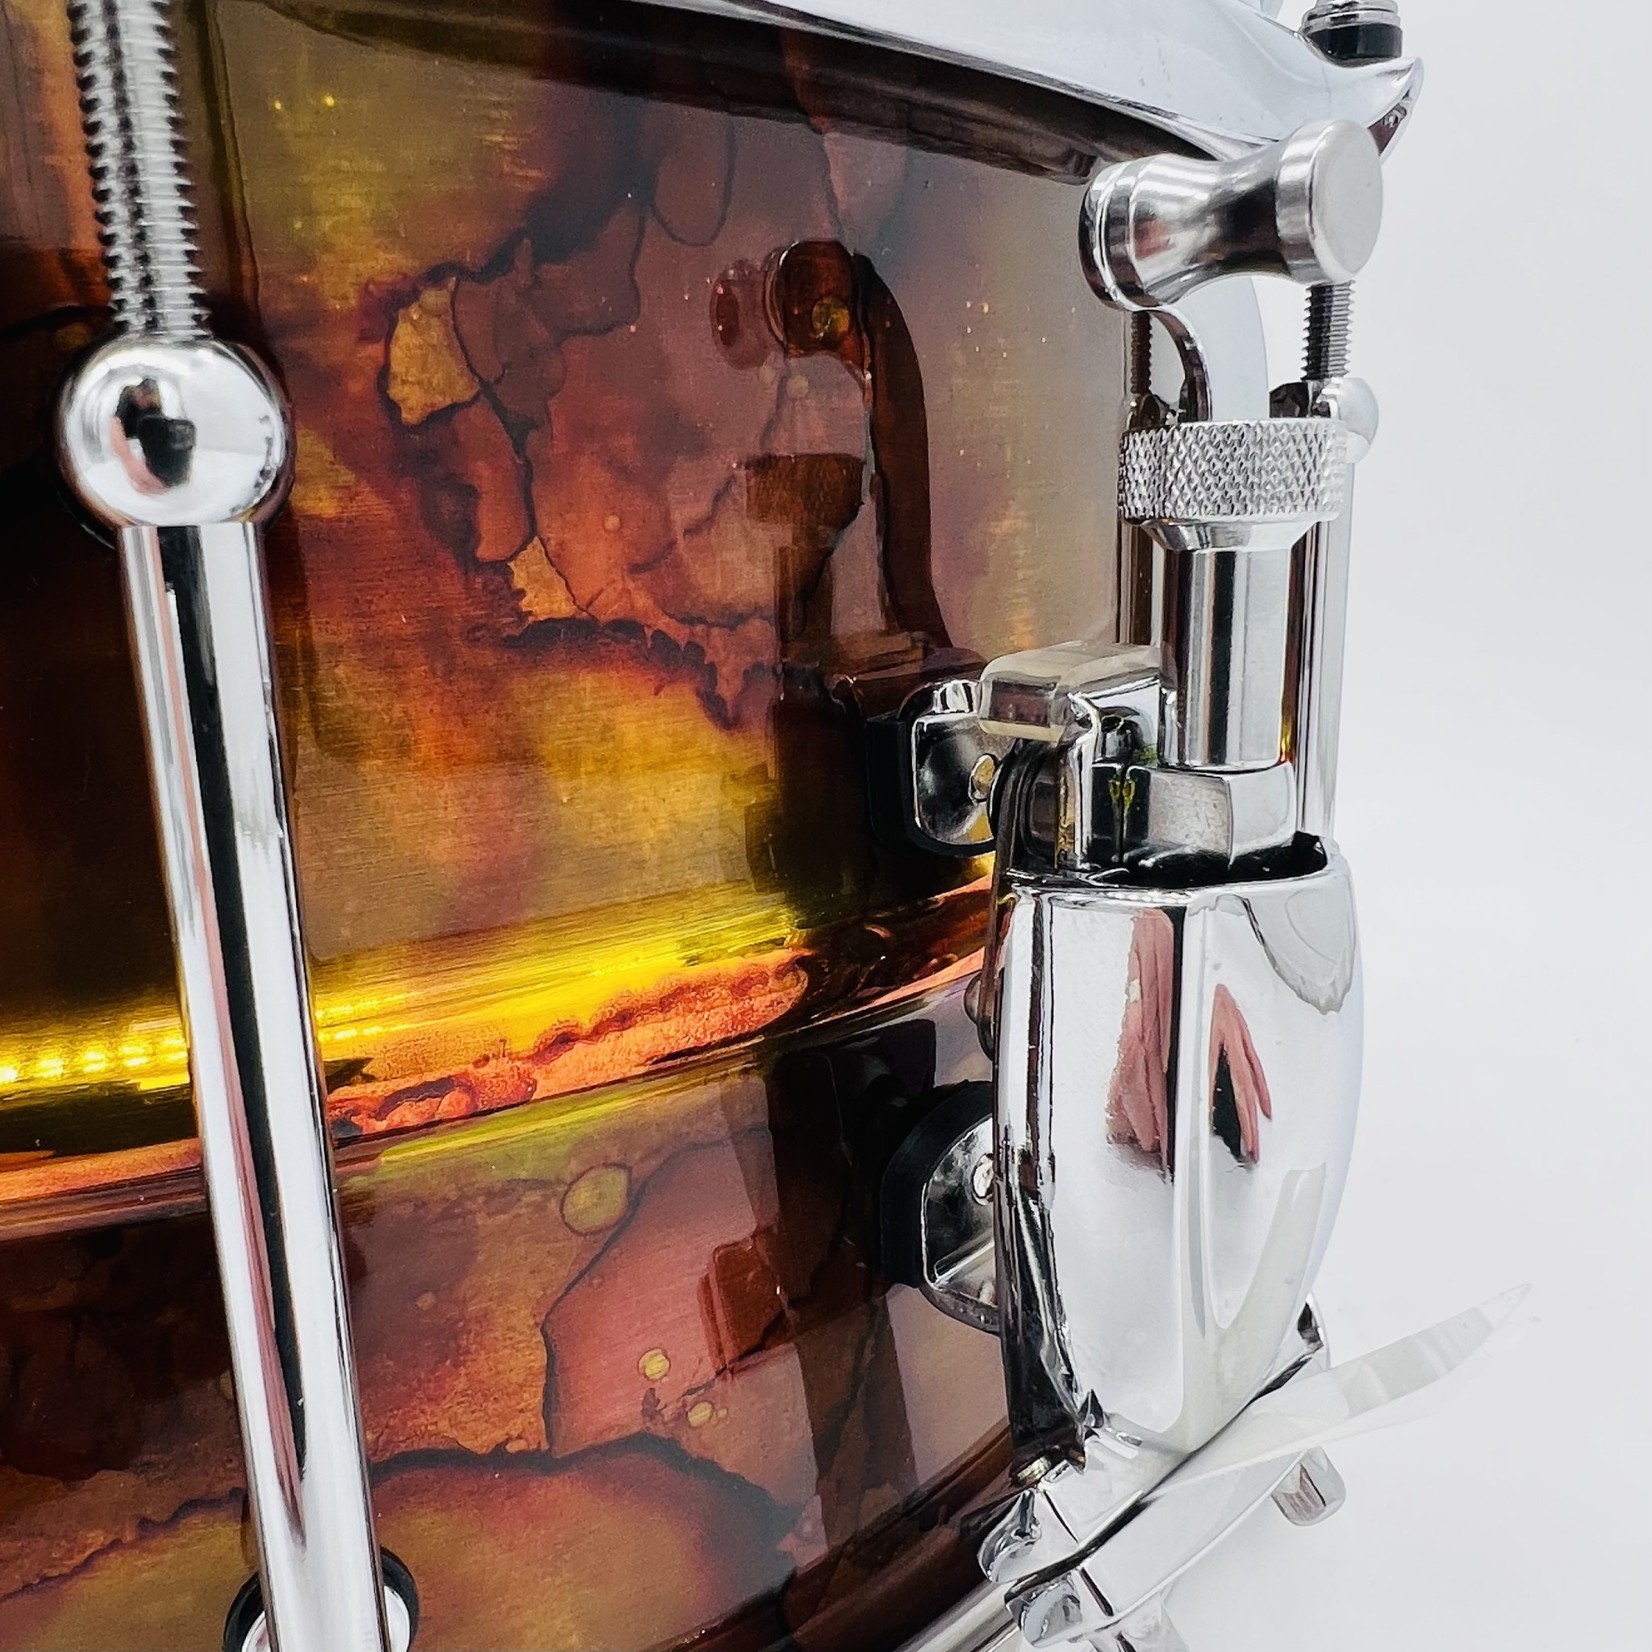 Pork Pie Pork Pie 7x13" Polished Bead Patina Brass Snare Drum with Alcohol Ink (One Of A Kind)